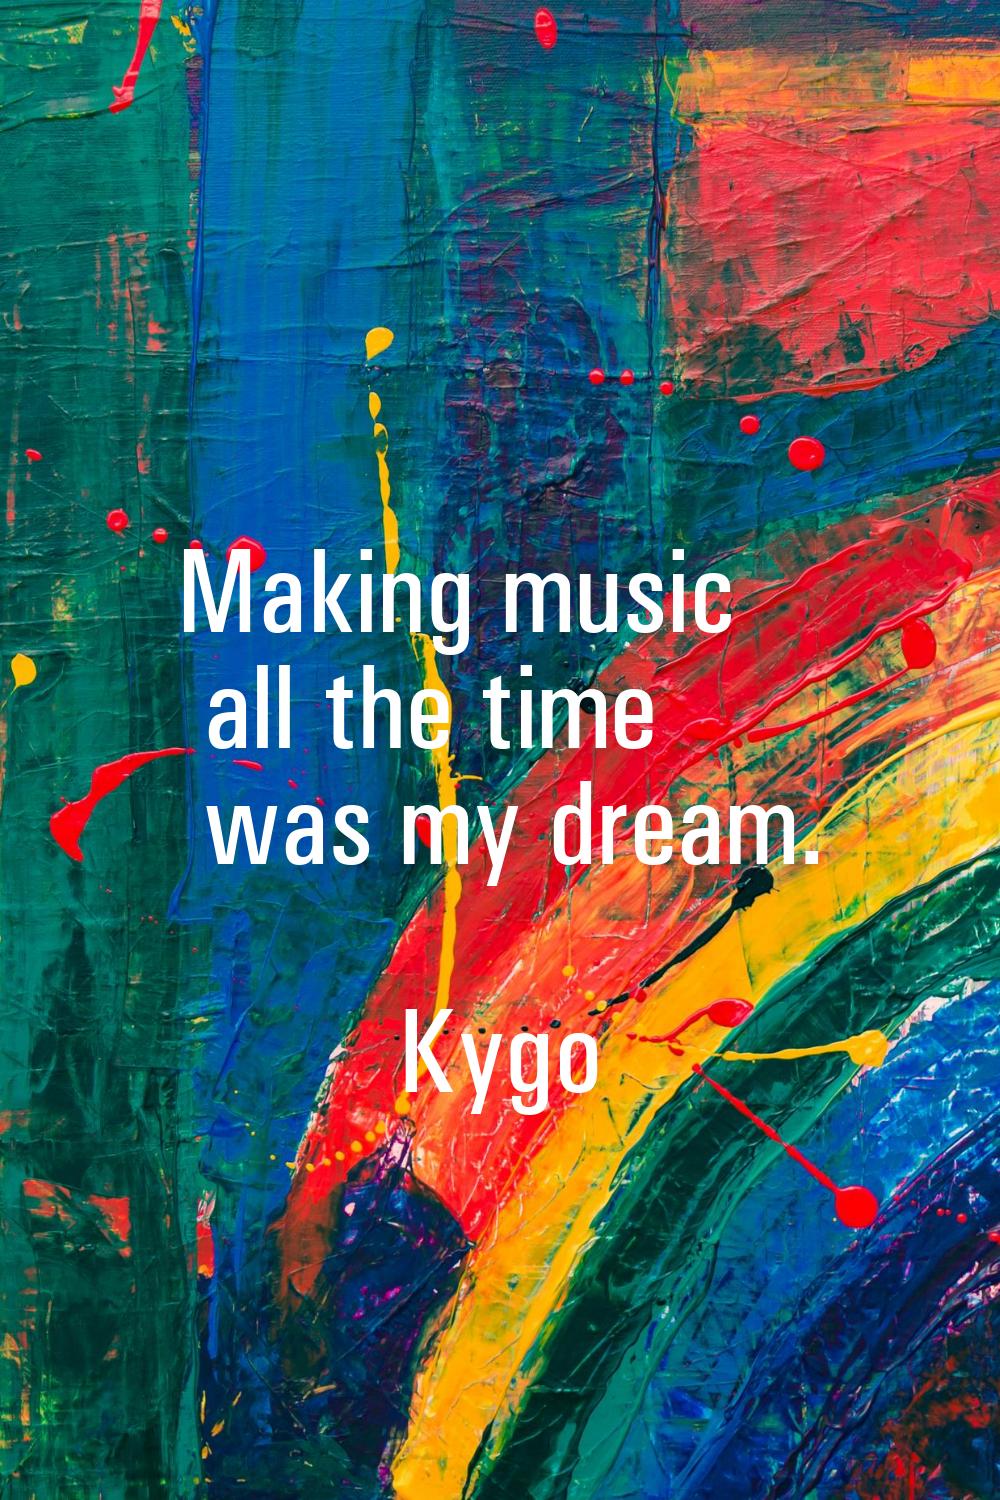 Making music all the time was my dream.